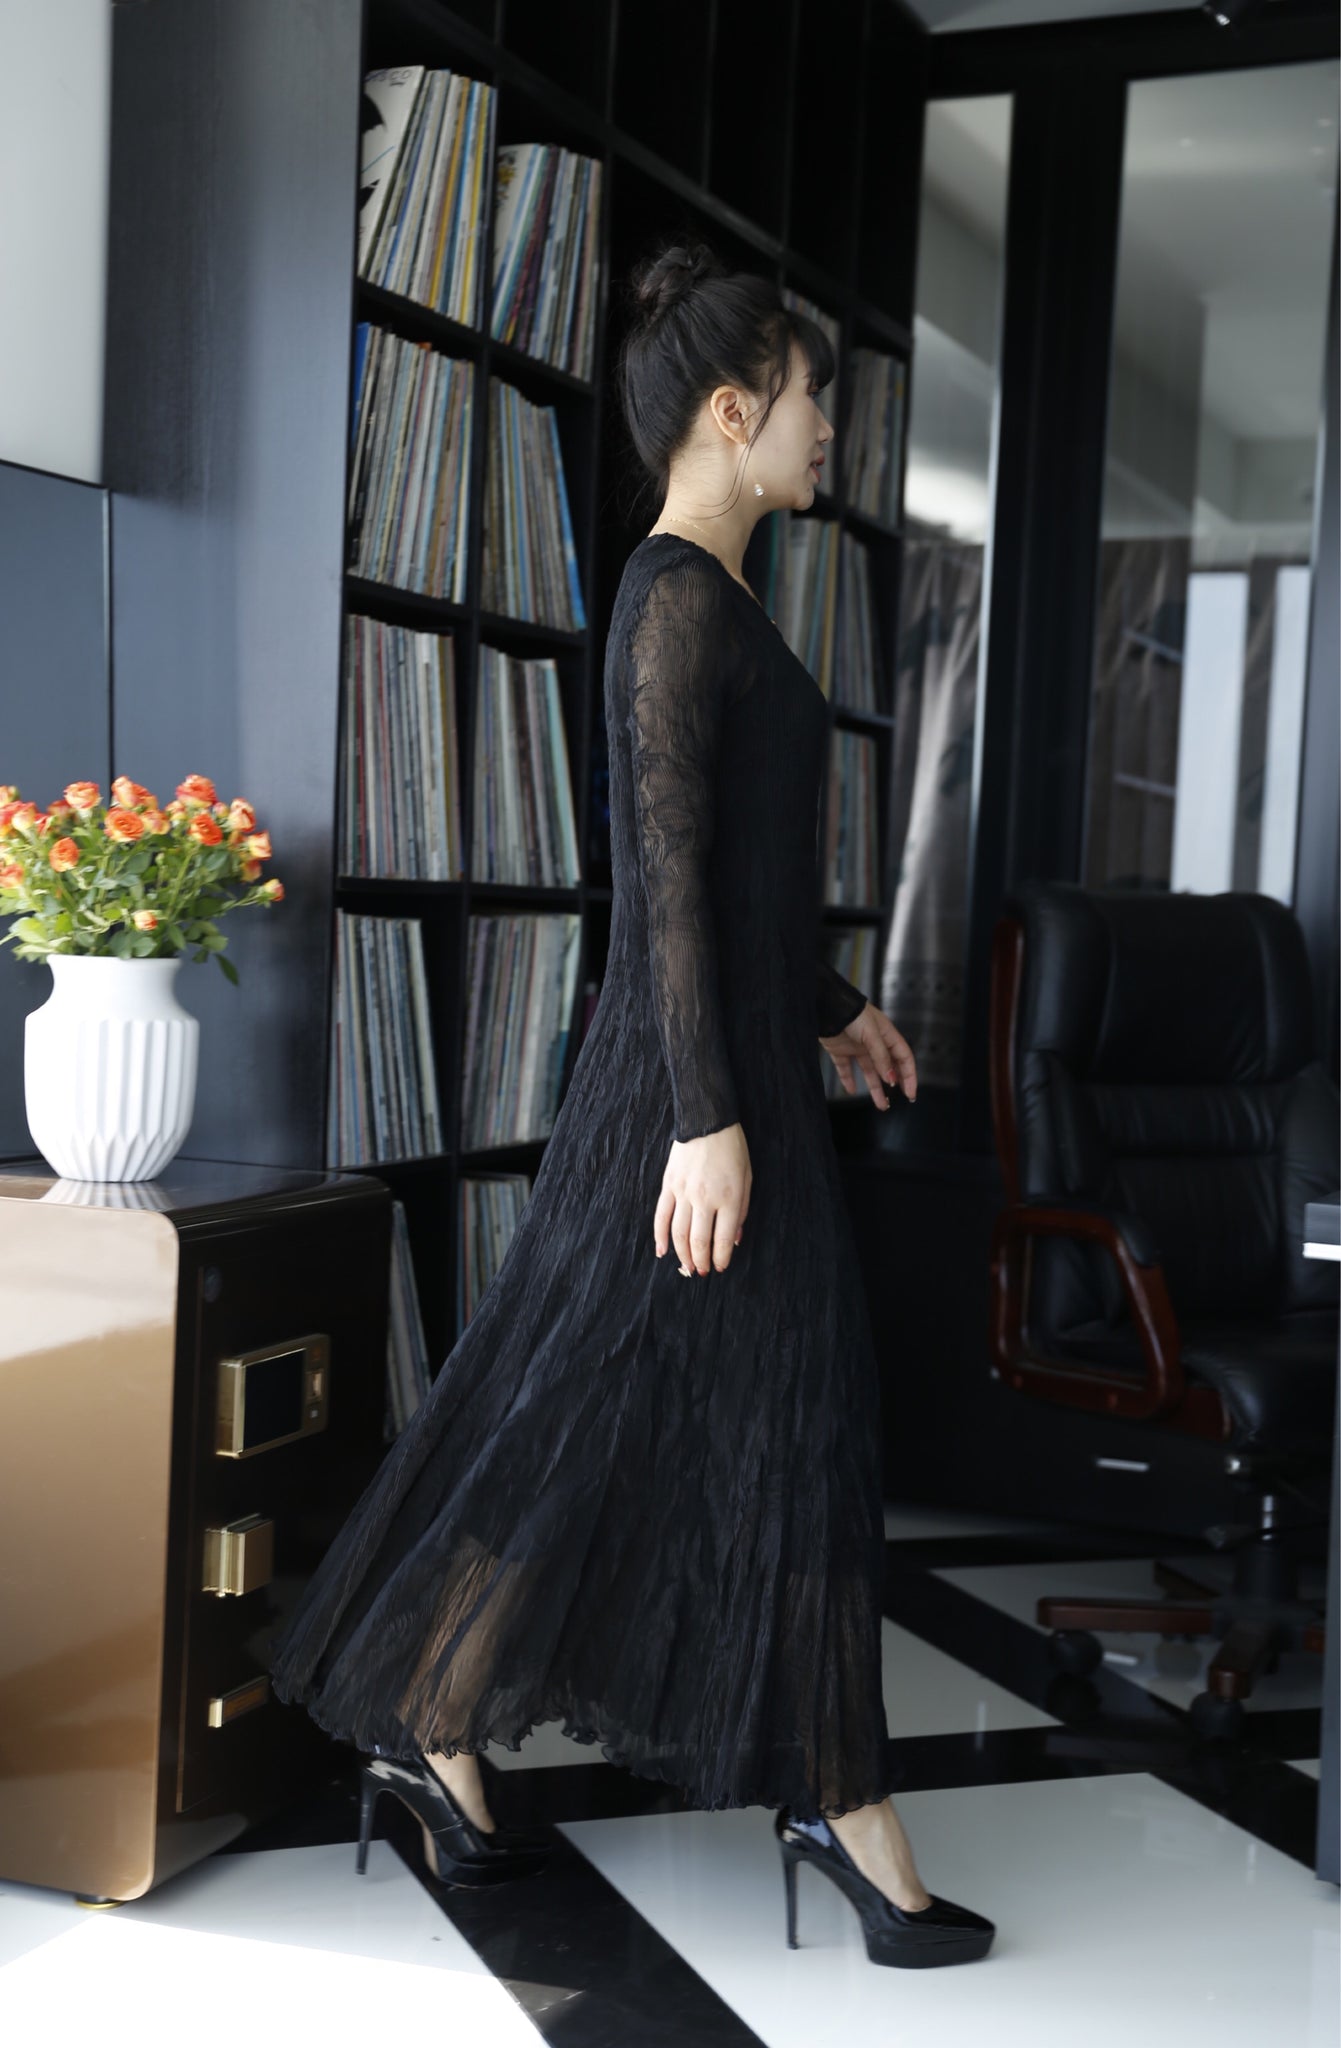 Pleated long sleeve crown neck dress